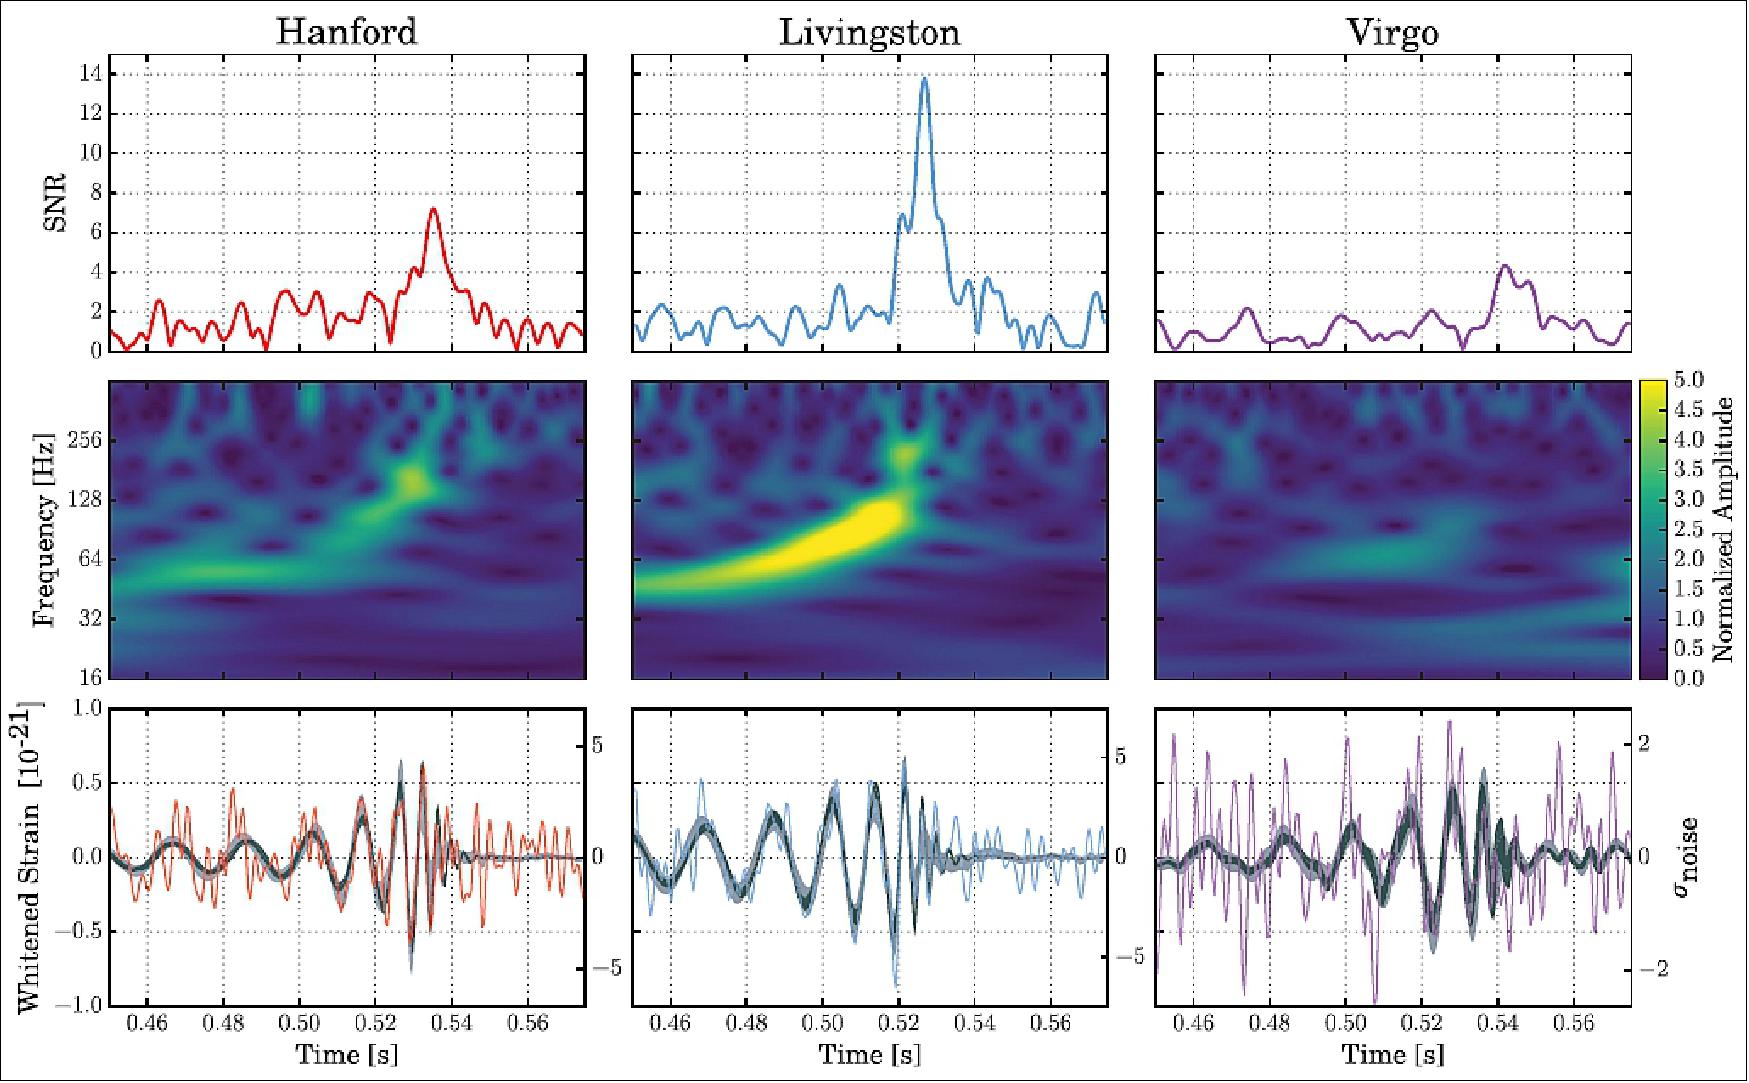 Figure 21: The GWevent GW170814 observed by LIGO Hanford, LIGO Livingston, and Virgo. Times are shown from August 14, 2017, 10:30:43 UTC. Top row: SNR time series produced in low latency and used by the low-latency localization pipeline on August 14, 2017. The time series were produced by time shifting the best-match template from the online analysis and computing the integrated SNR at each point in time. The single-detector SNRs in Hanford, Livingston, and Virgo are 7.3, 13.7, and 4.4, respectively. Second row: Time-frequency representation of the strain data around the time of GW170814. Bottom row: Time-domain detector data (in color), and 90% confidence intervals for waveforms reconstructed from a morphology-independent wavelet analysis (light gray) and BBH (Binary Black Hole) models (image credit: LIGO and Virgo Collaboration)